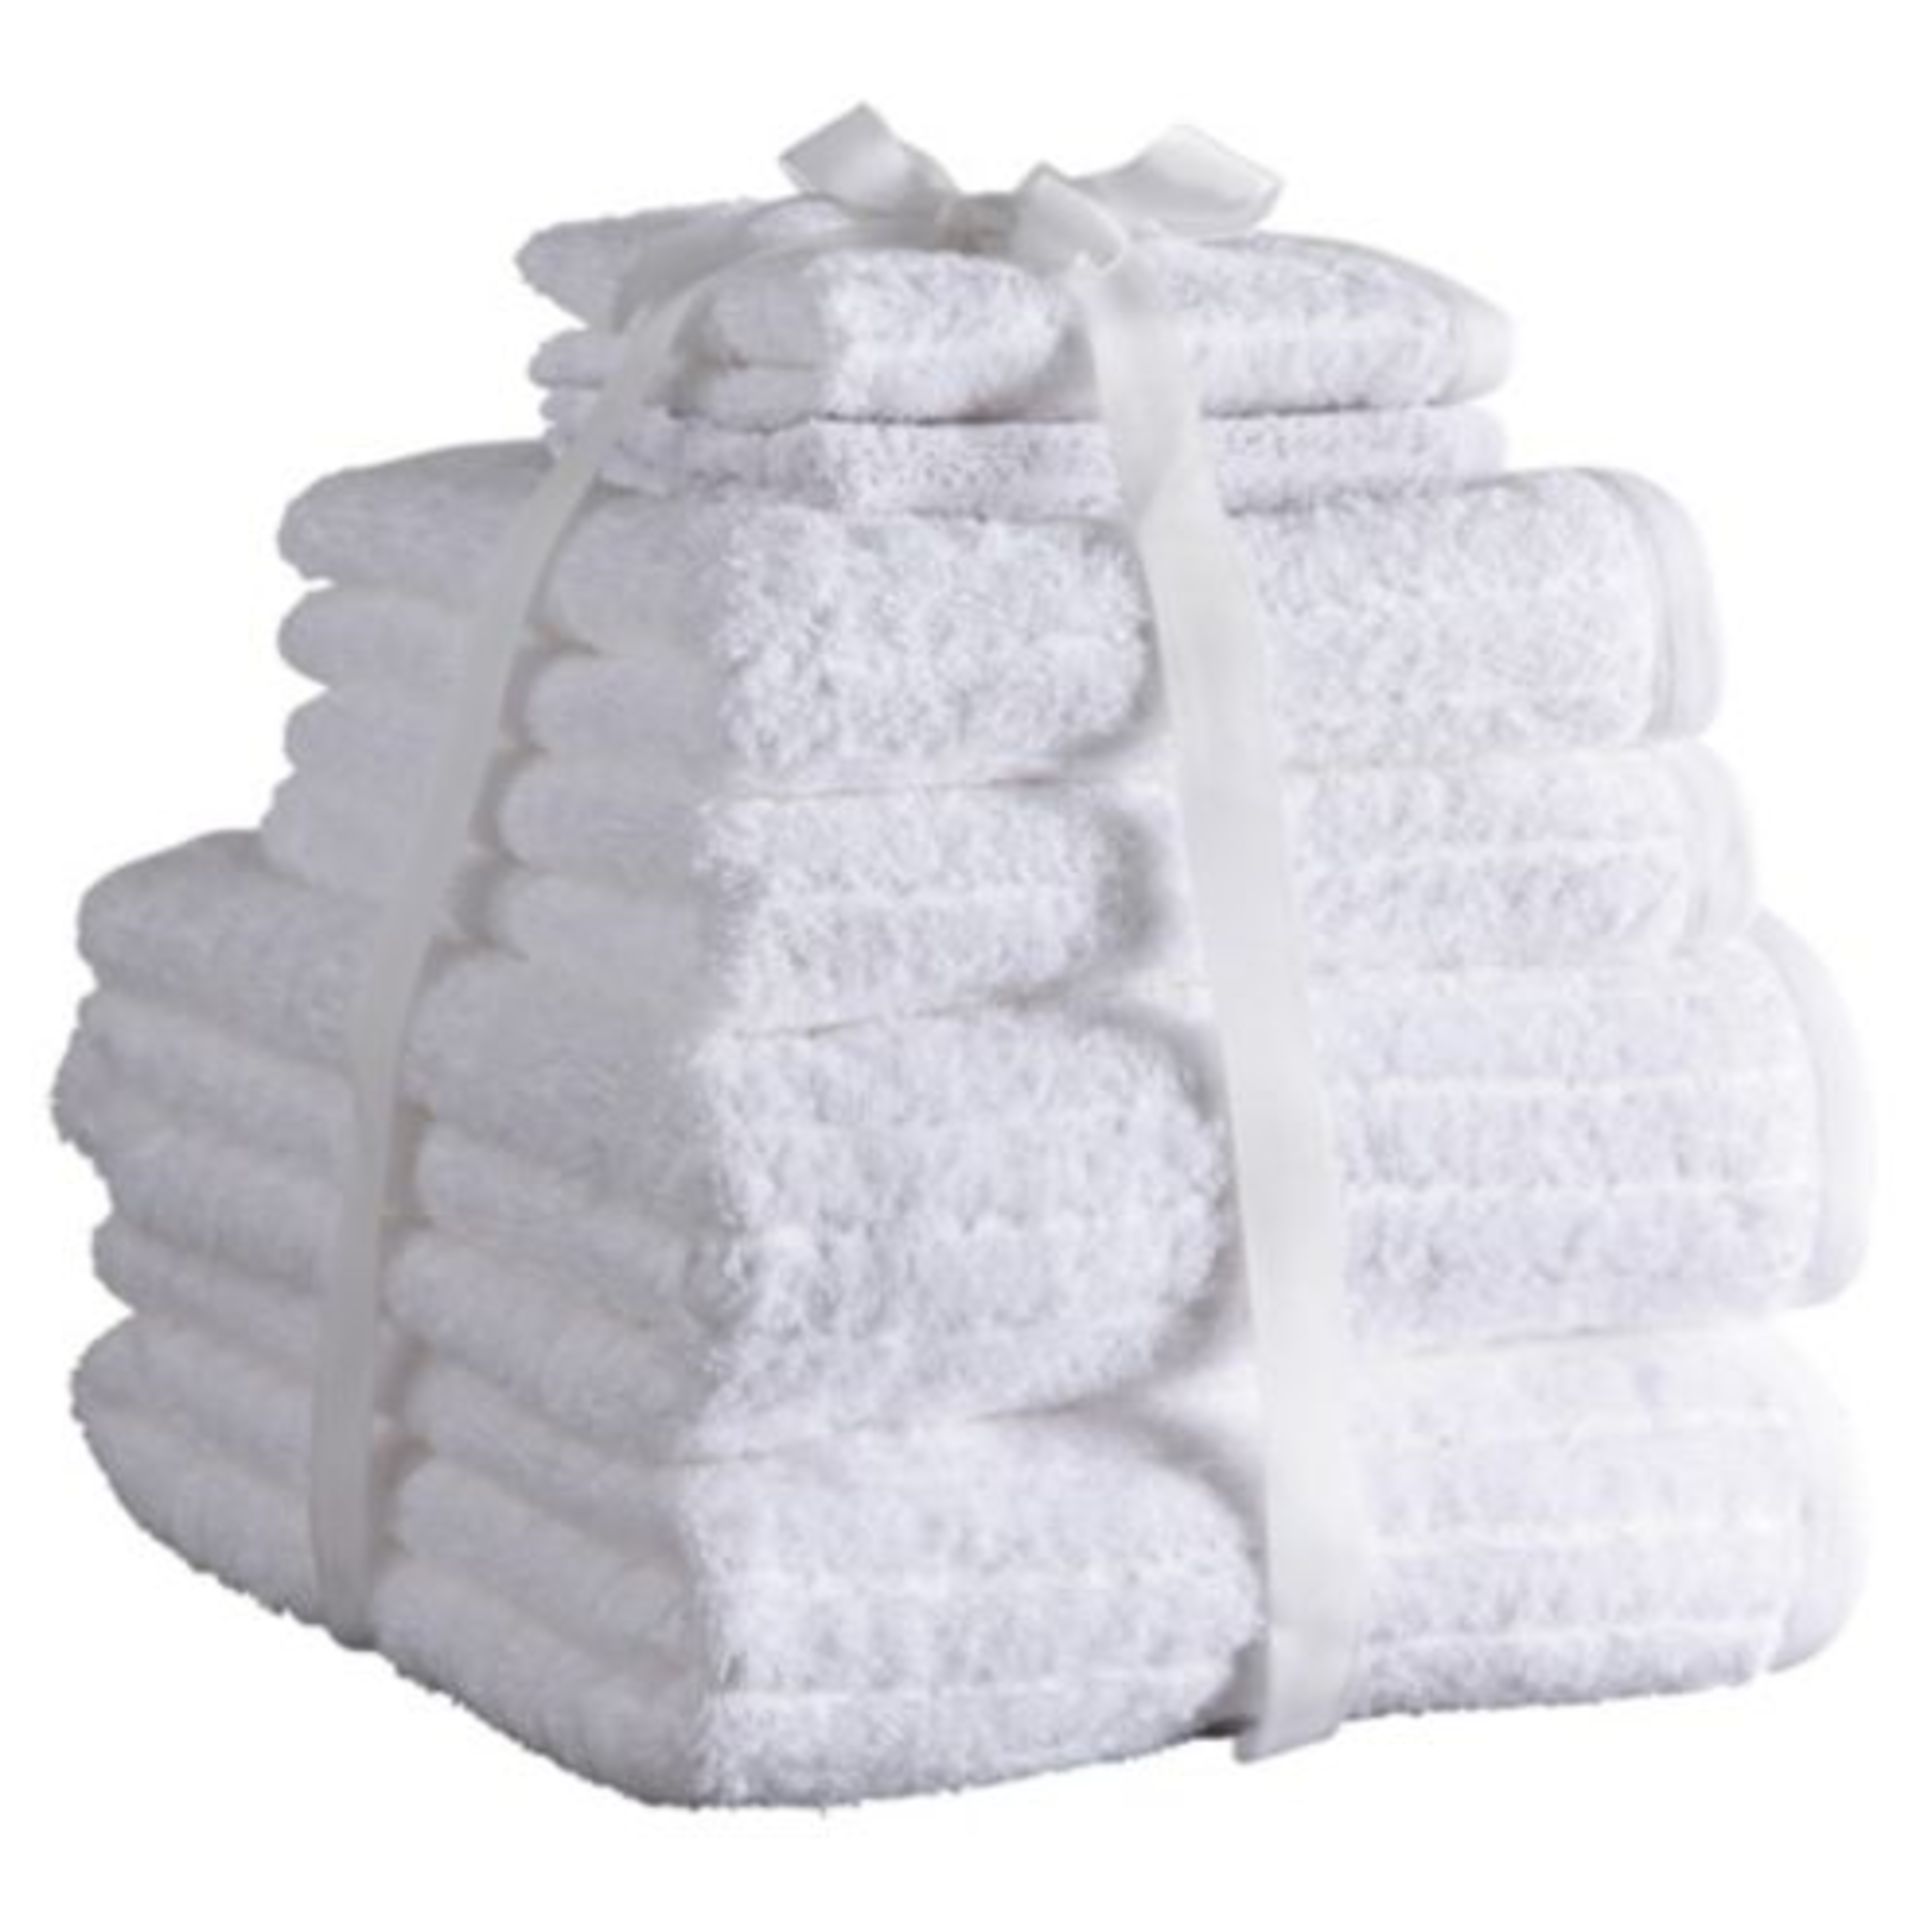 V Brand New Six Piece White Towel Bale Set including 2 Bath Towels 2 Hand Towels and Two Face